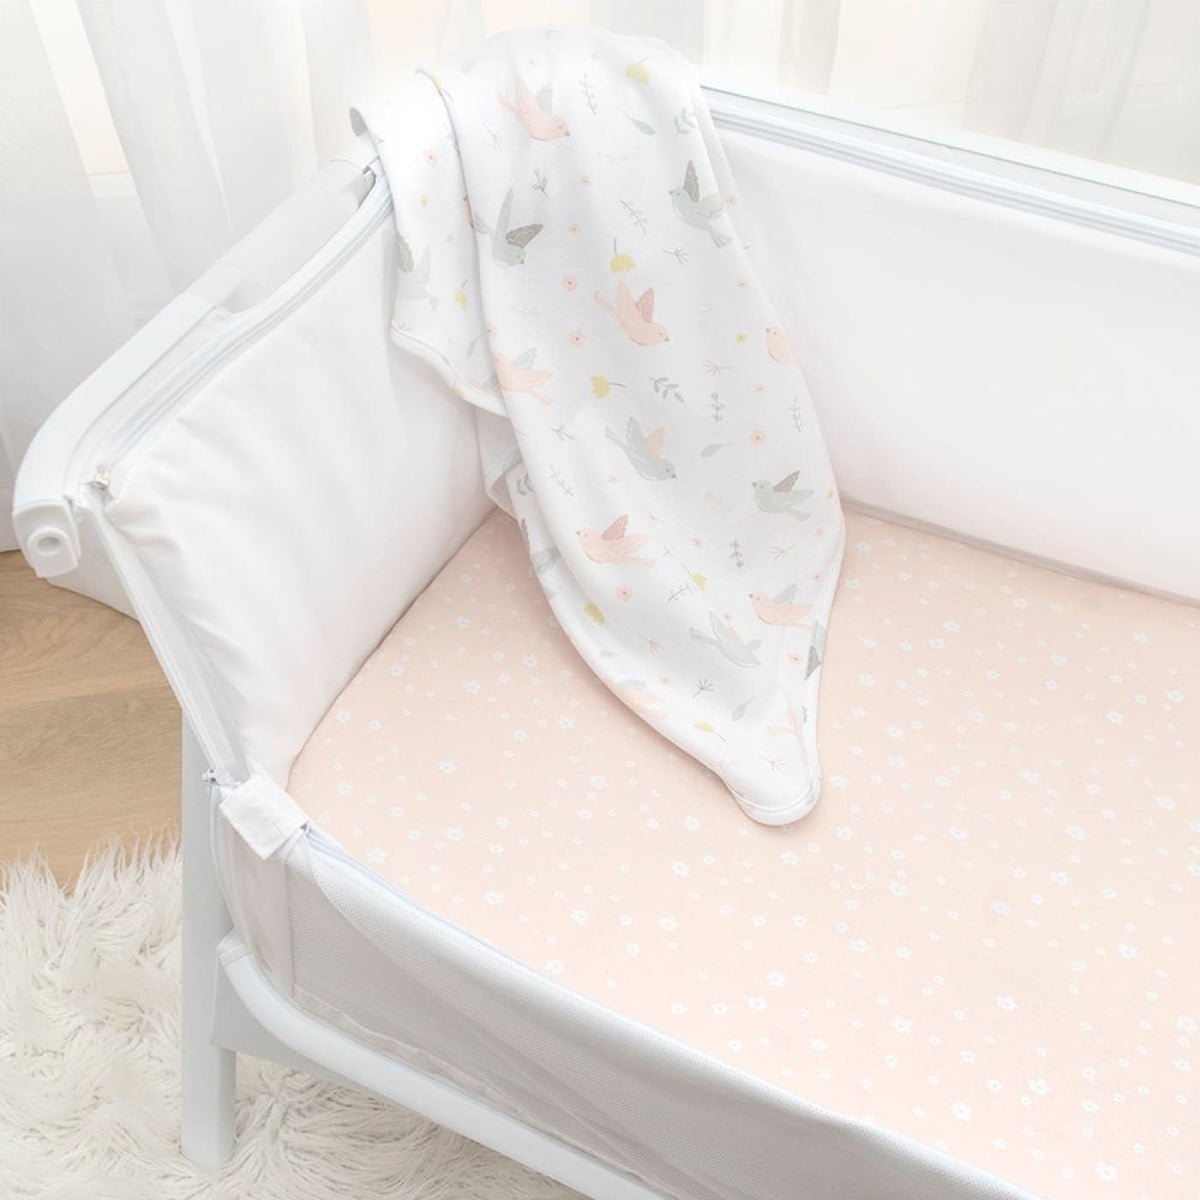 Living Textiles 2-pack Jersey Co-sleeper/Cradle Fitted Sheet - Ava/Blush Floral - Ava/Blush Floral - NURSERY &amp; BEDTIME - BASS/CRADLE/COSLEEP